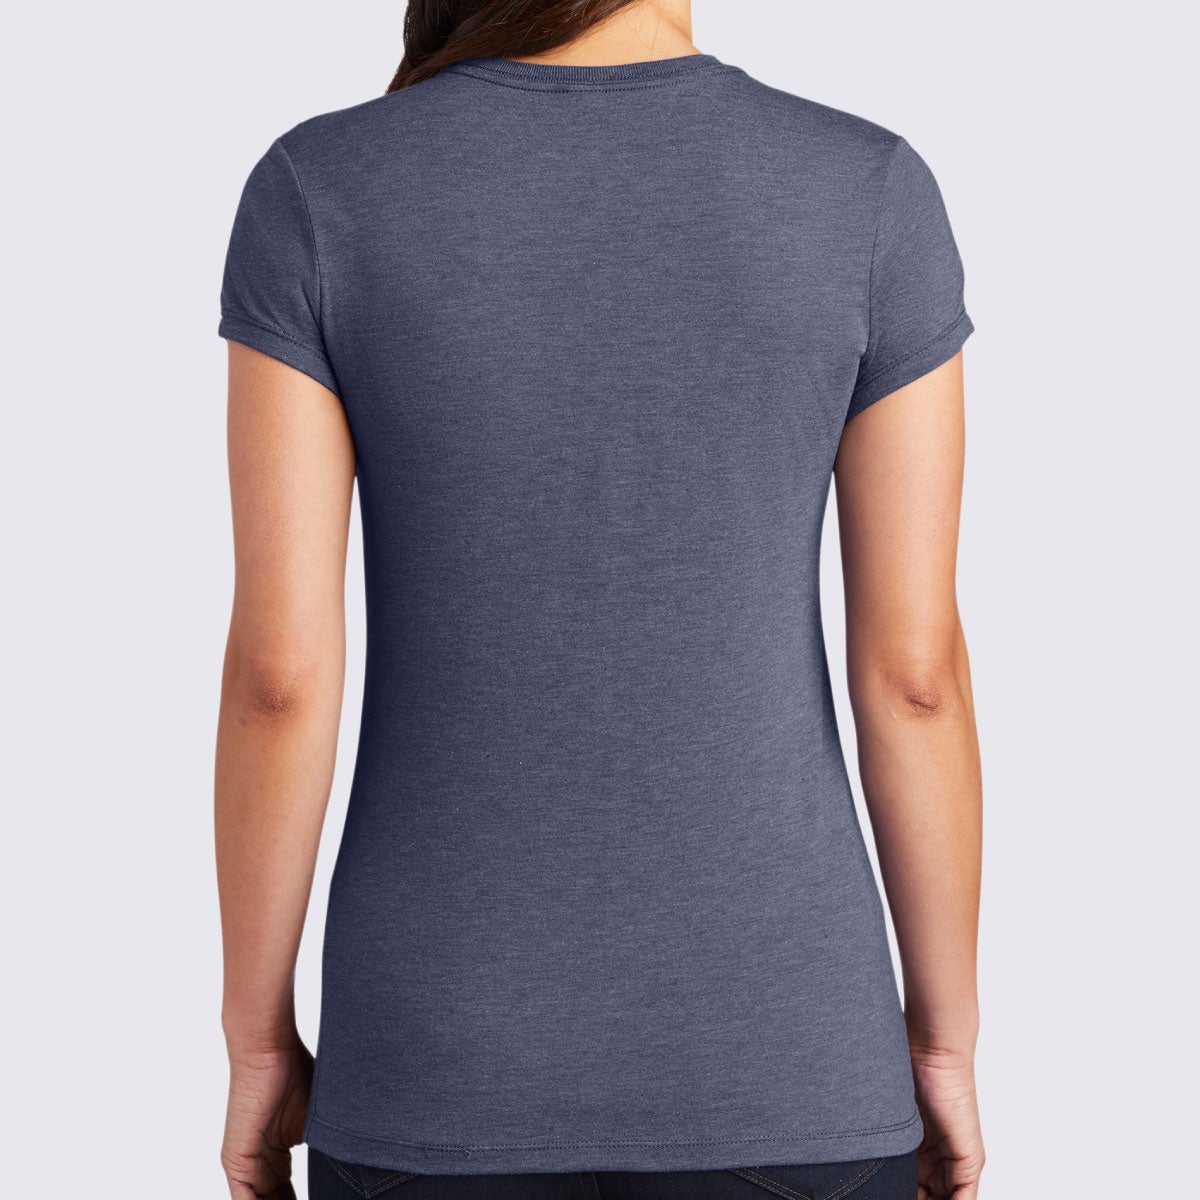 Mind Over Matter Doodle Women&#39;s Fitted Perfect Tri® Tee